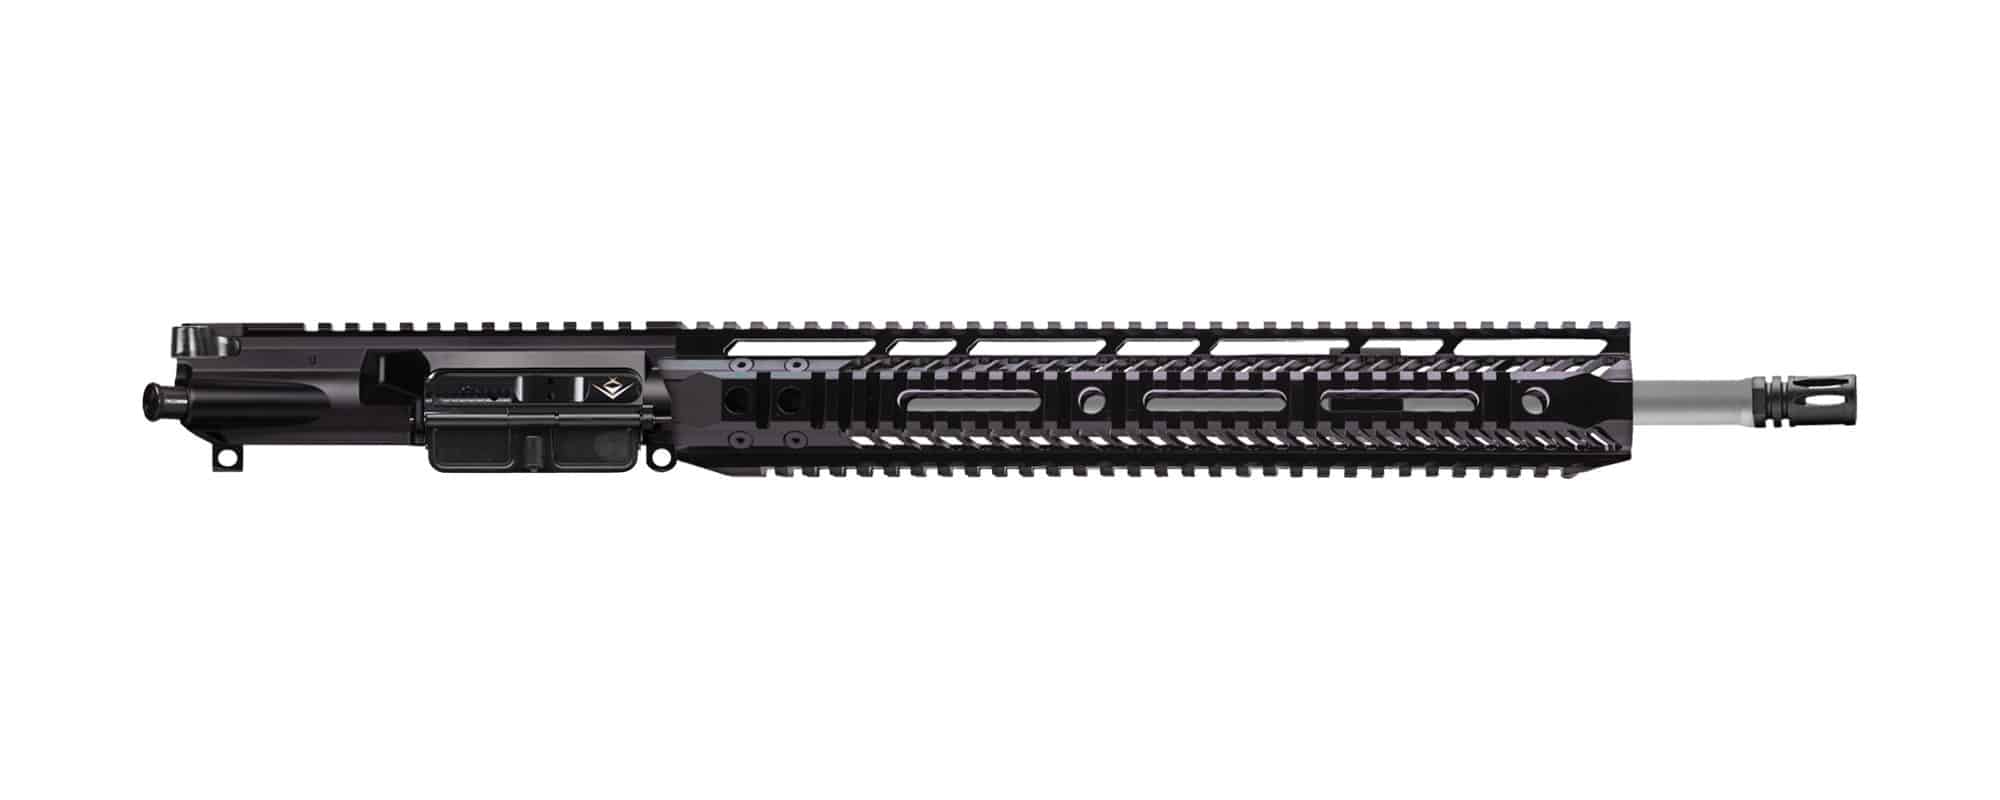 16" Mid length Stainless Steel Upper w/ GPR 14" Rail System